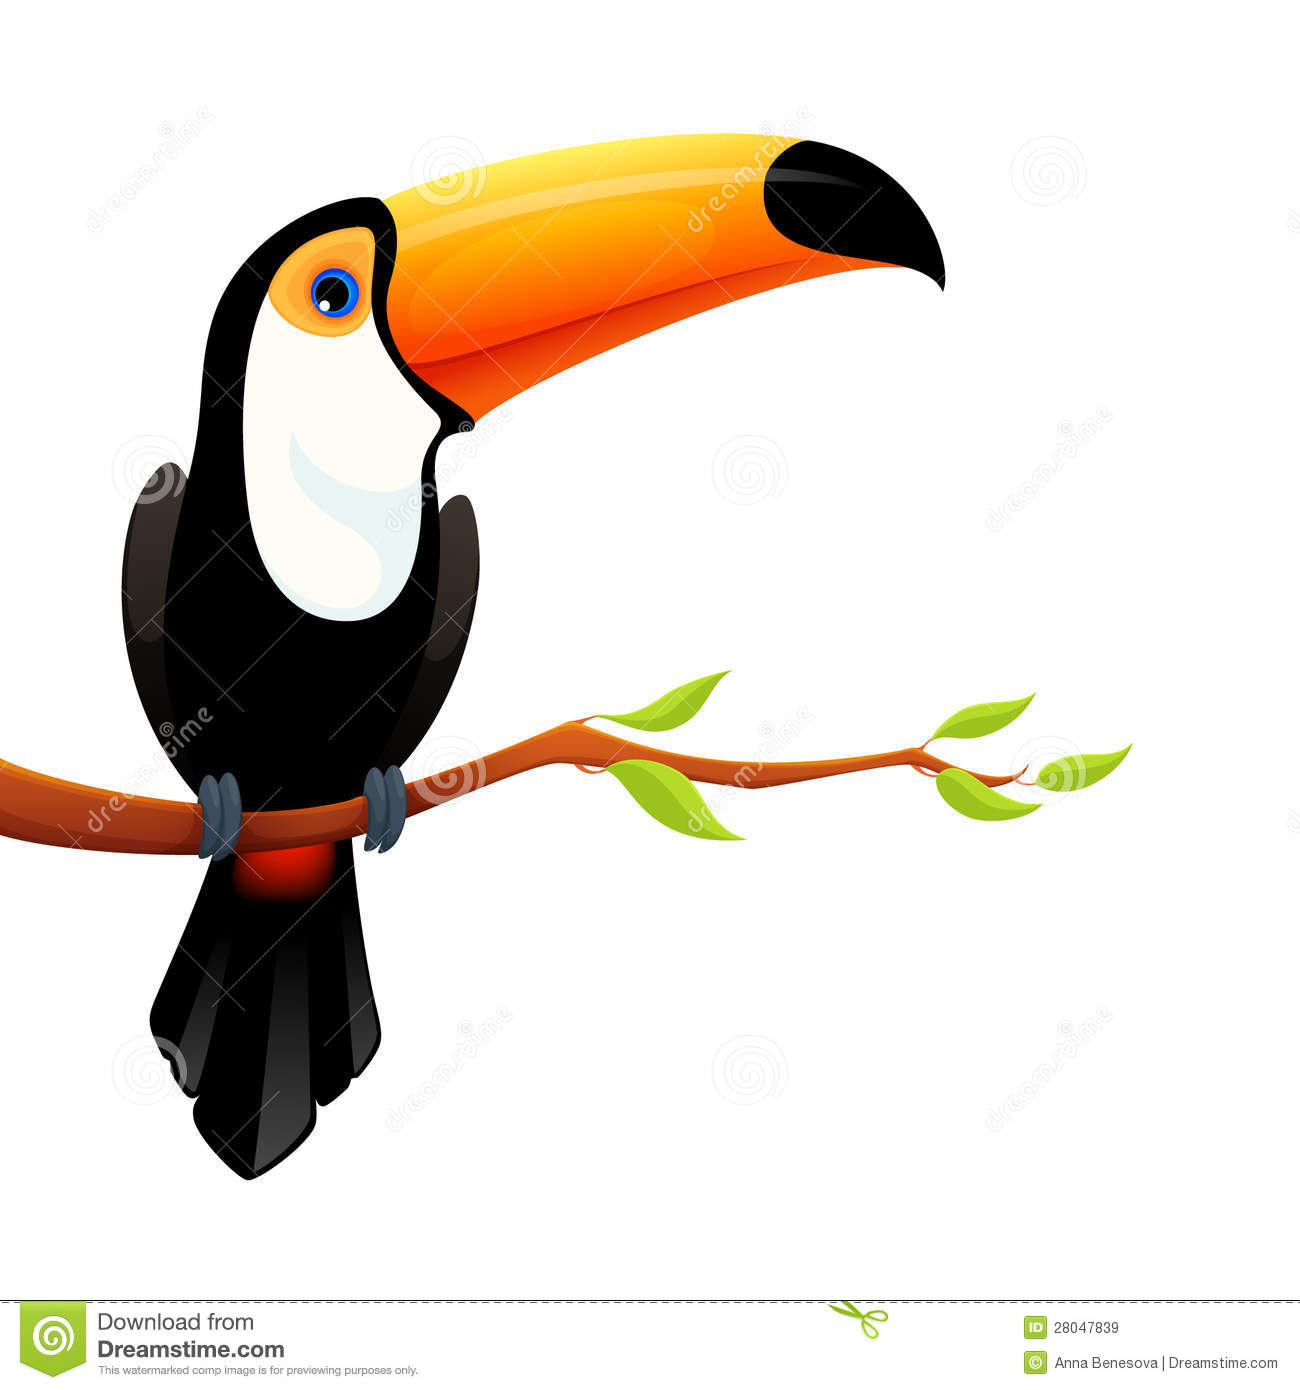 Colorful Illustration Of A Cute Toucan Royalty Free Stock Images